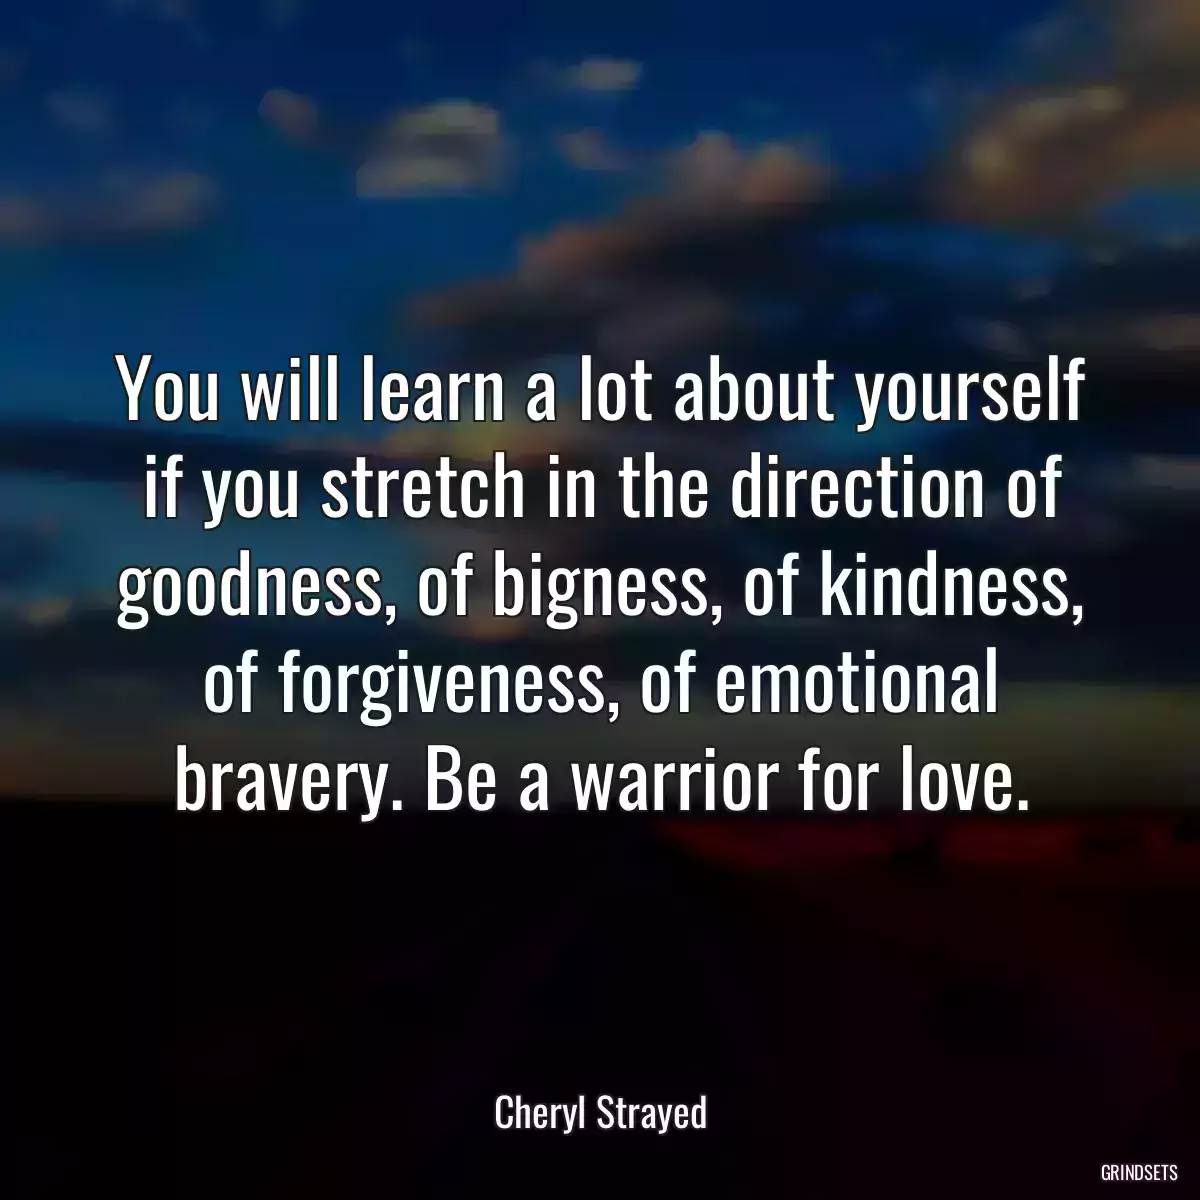 You will learn a lot about yourself if you stretch in the direction of goodness, of bigness, of kindness, of forgiveness, of emotional bravery. Be a warrior for love.